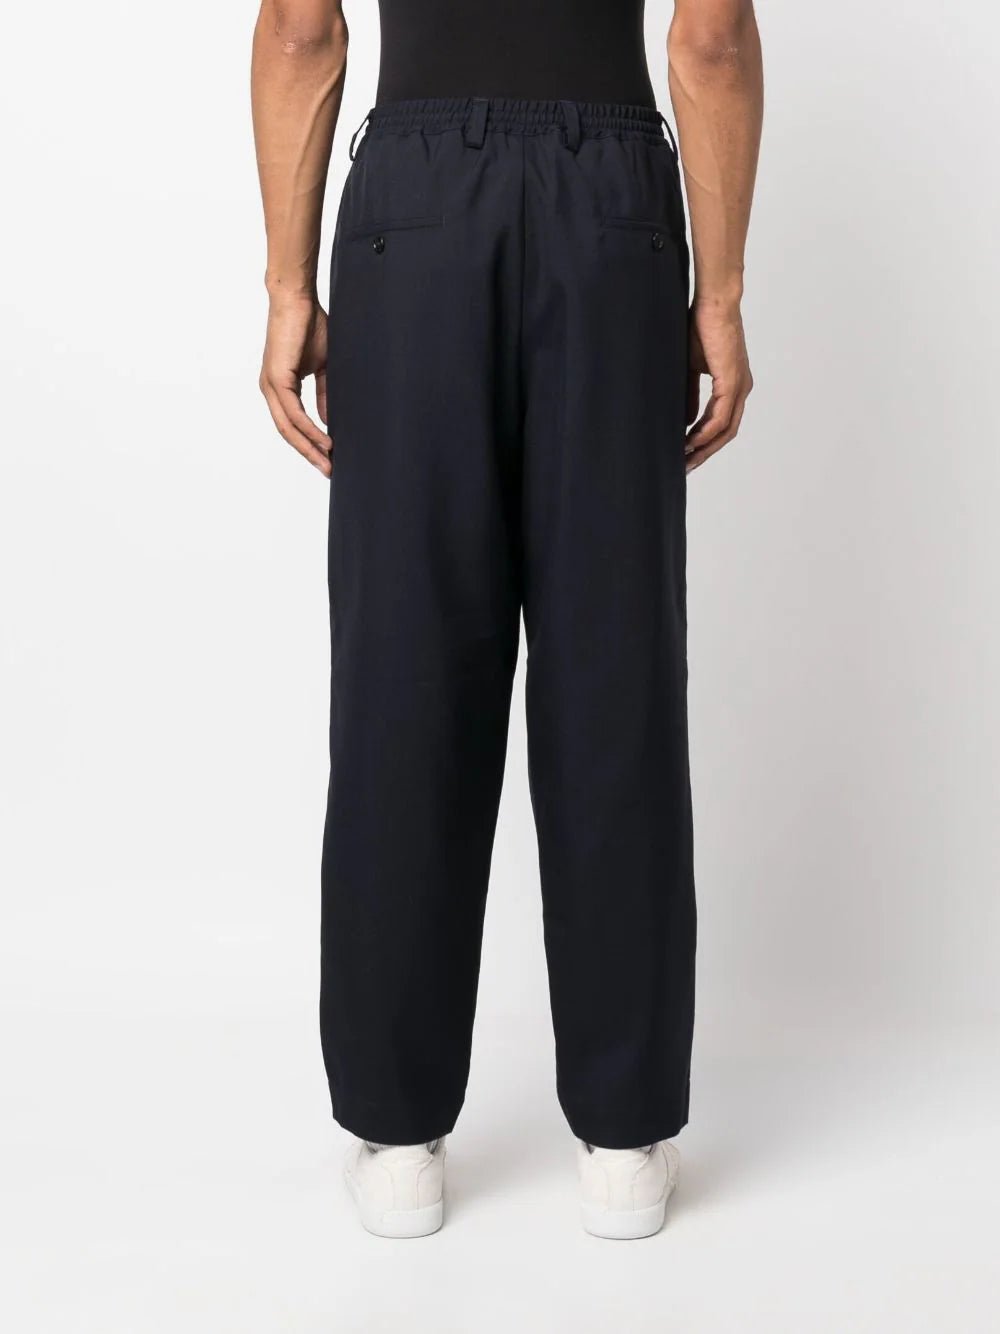 MarniTapered-Leg Wool Trousers at Fashion Clinic